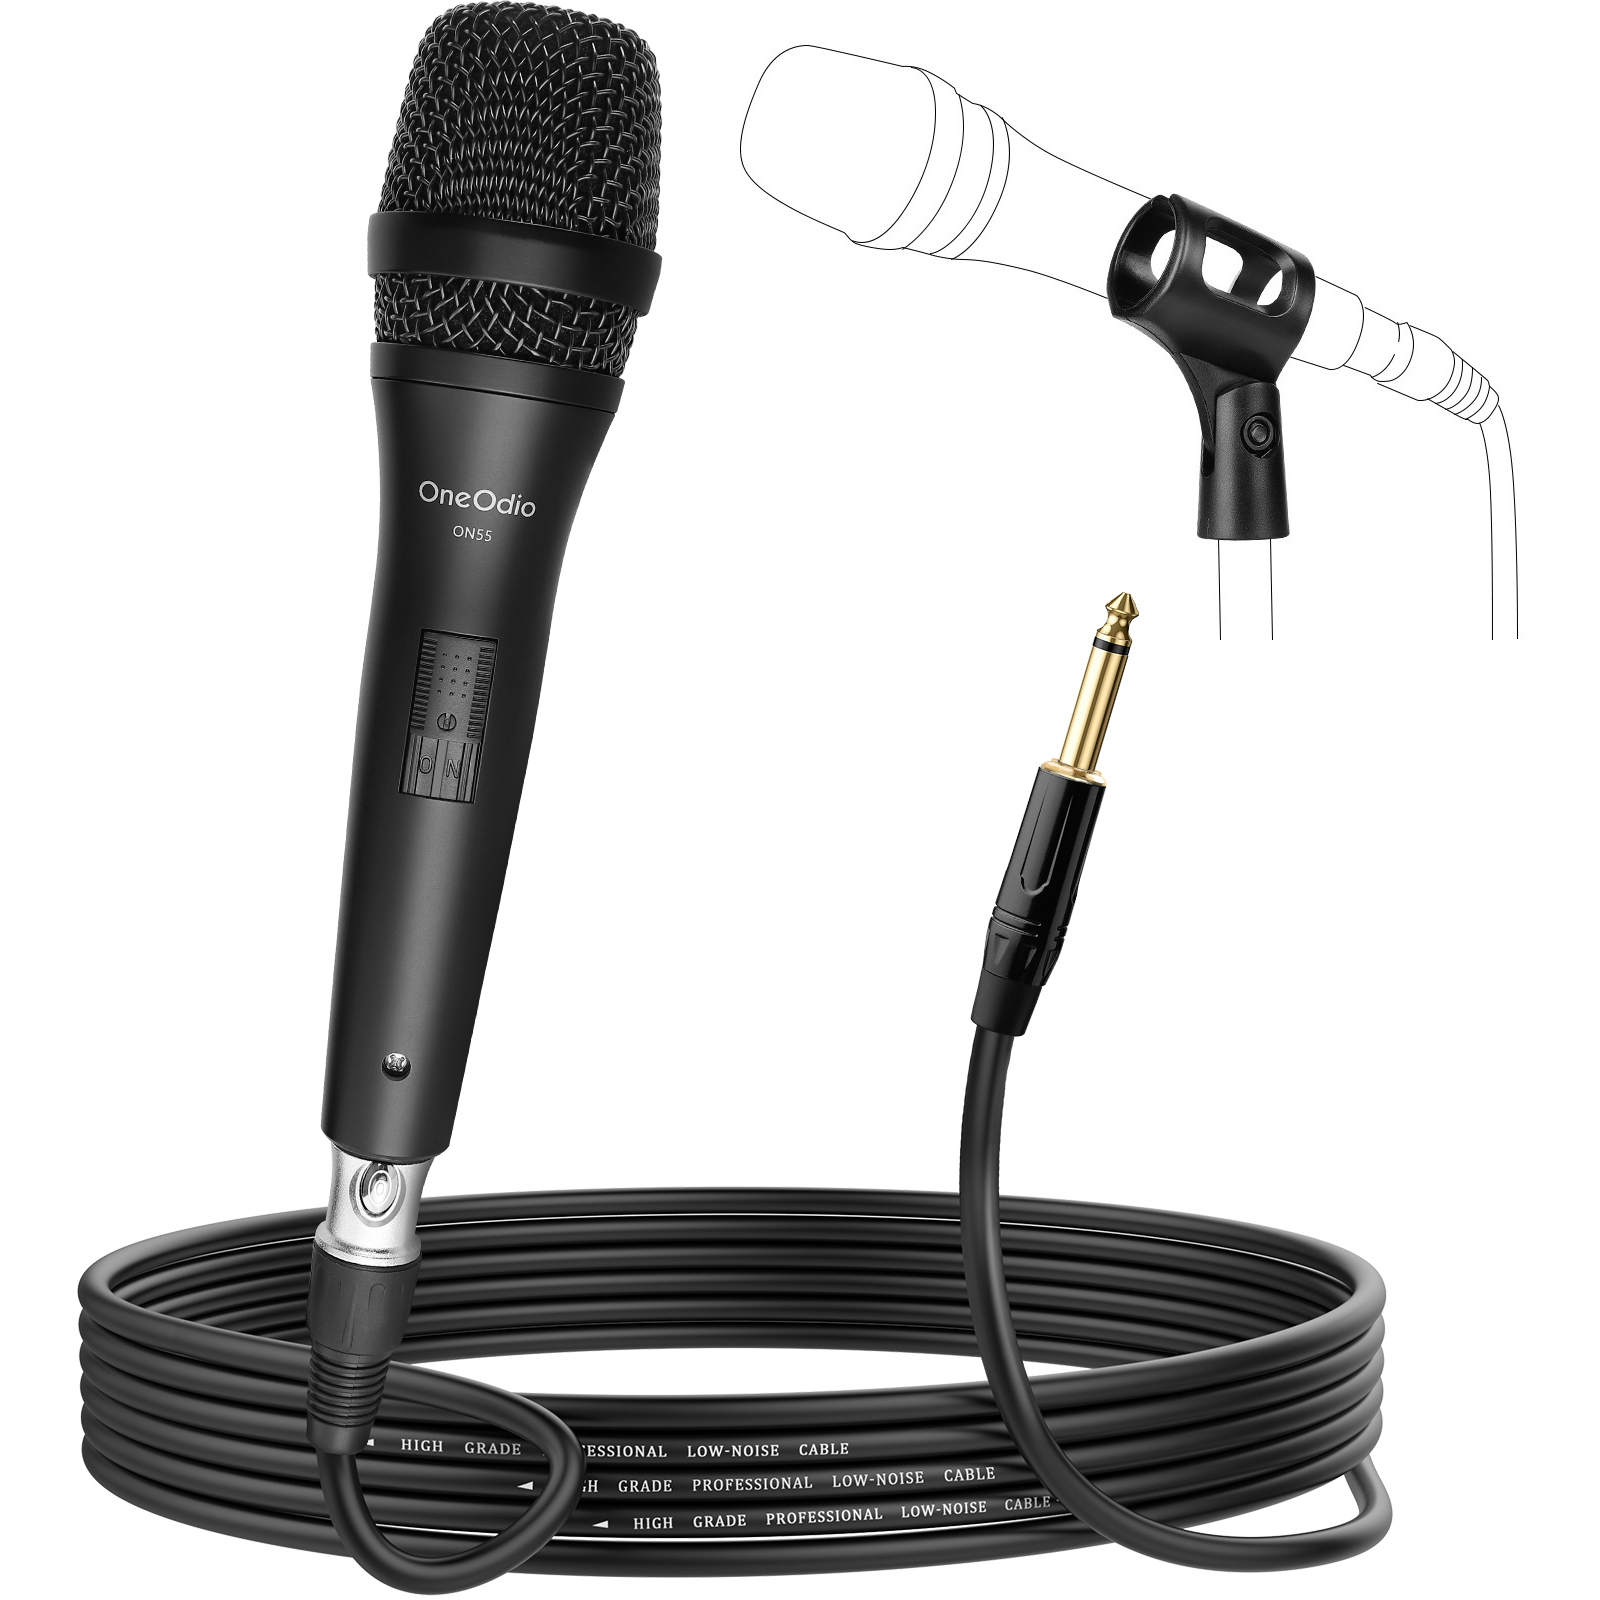 6974028140793 OneOdio ON55, Microphone, black - Mikrofon TV & HIFI,Lyd,Diverse lyd 21100001630 ON55